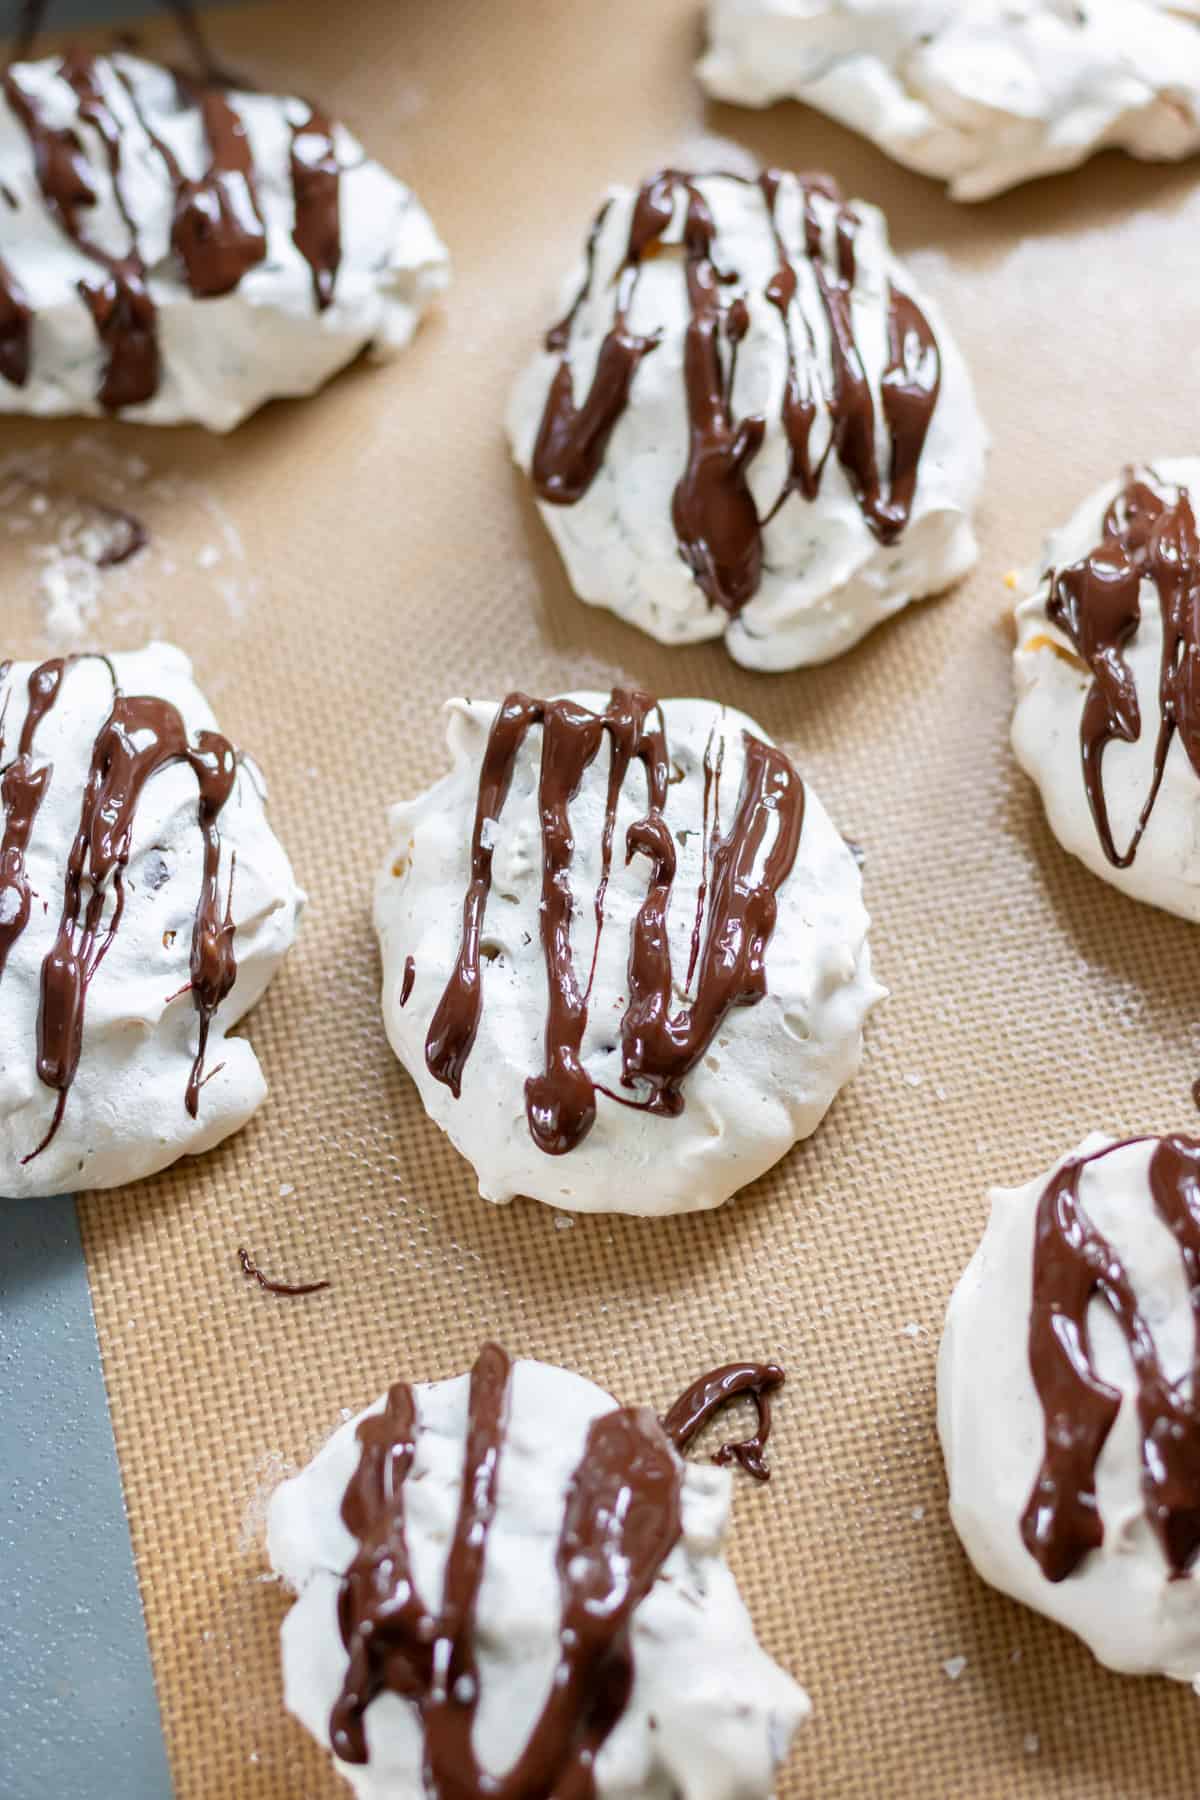 Melted chocolate drizzled onto the cornflake meringue cookies, then sprinkled with sea salt.